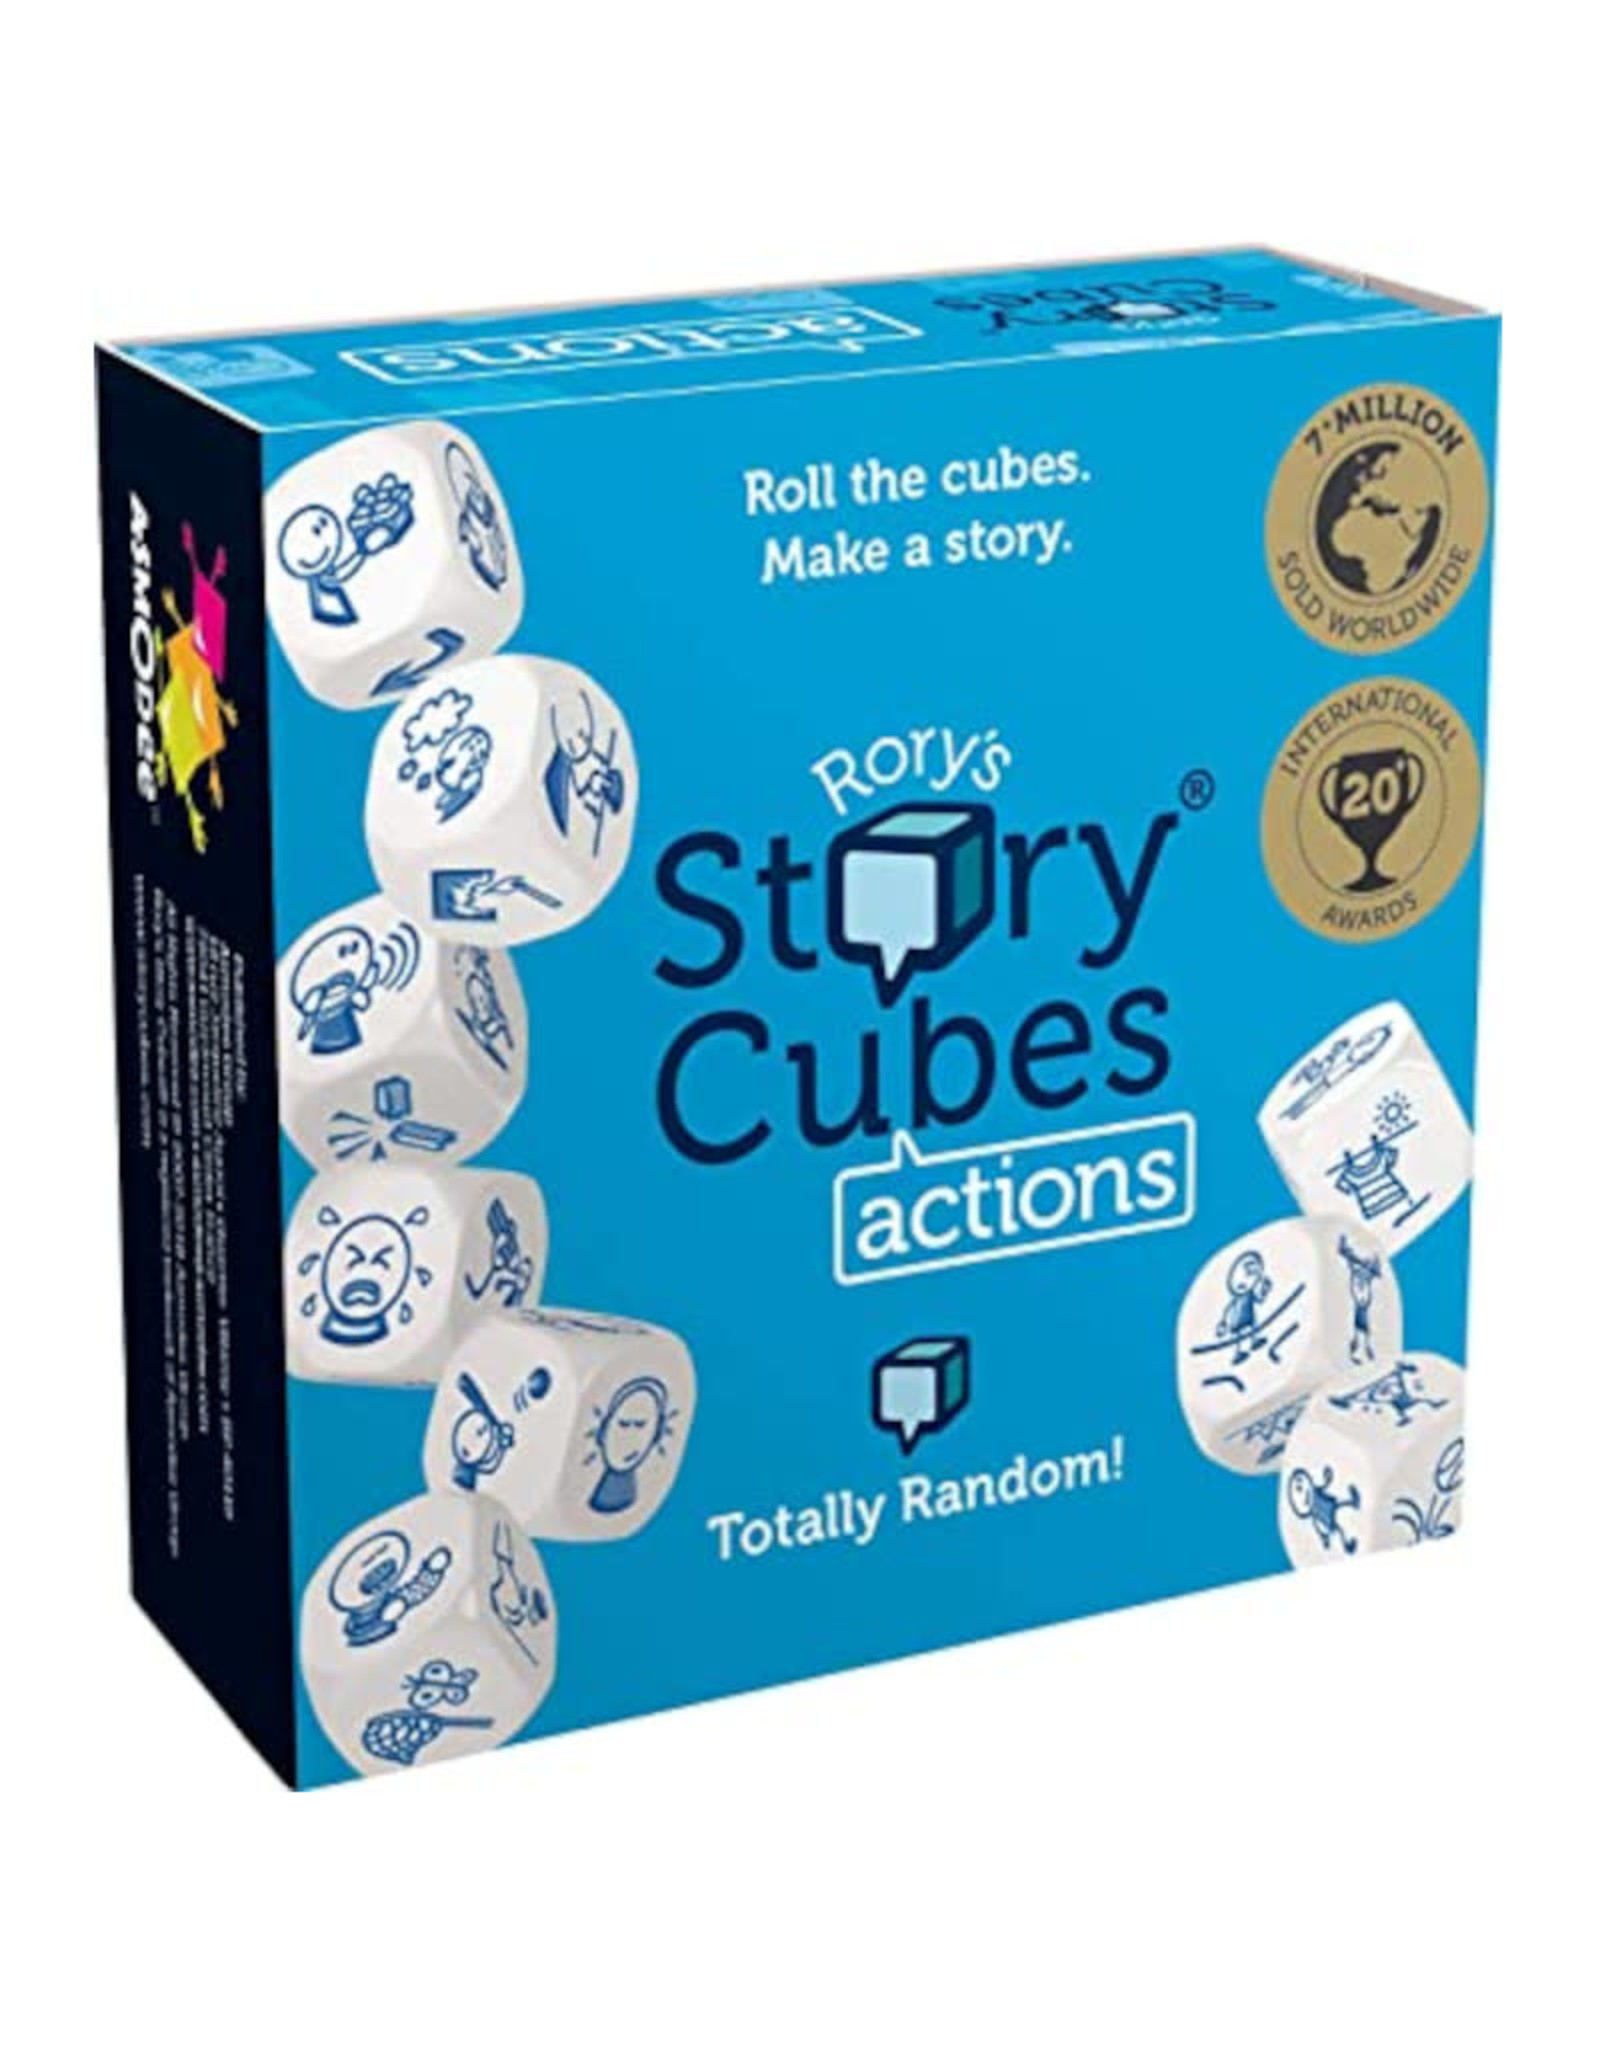 Rory's Story Cubes Actions (box)